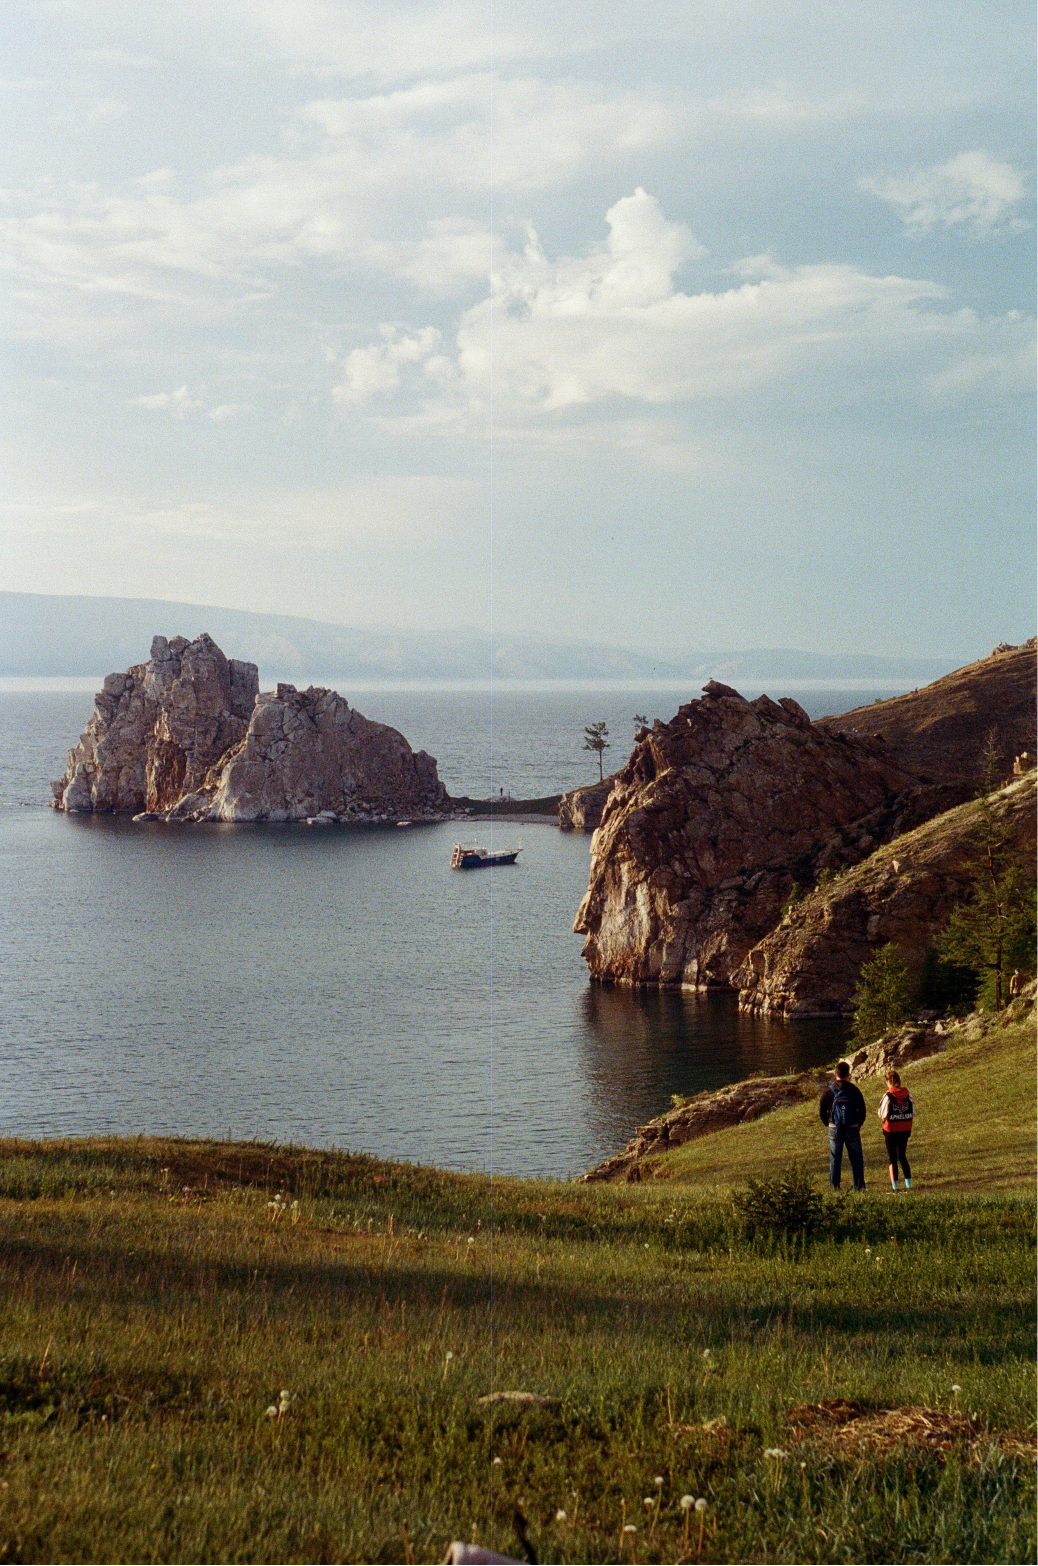 Green rolling hills in the forefront lead to a rocky cliff area by the sea. It extends into a little peninsula near the coast. A couple admires the sea on a grassy area to the right of the picture.